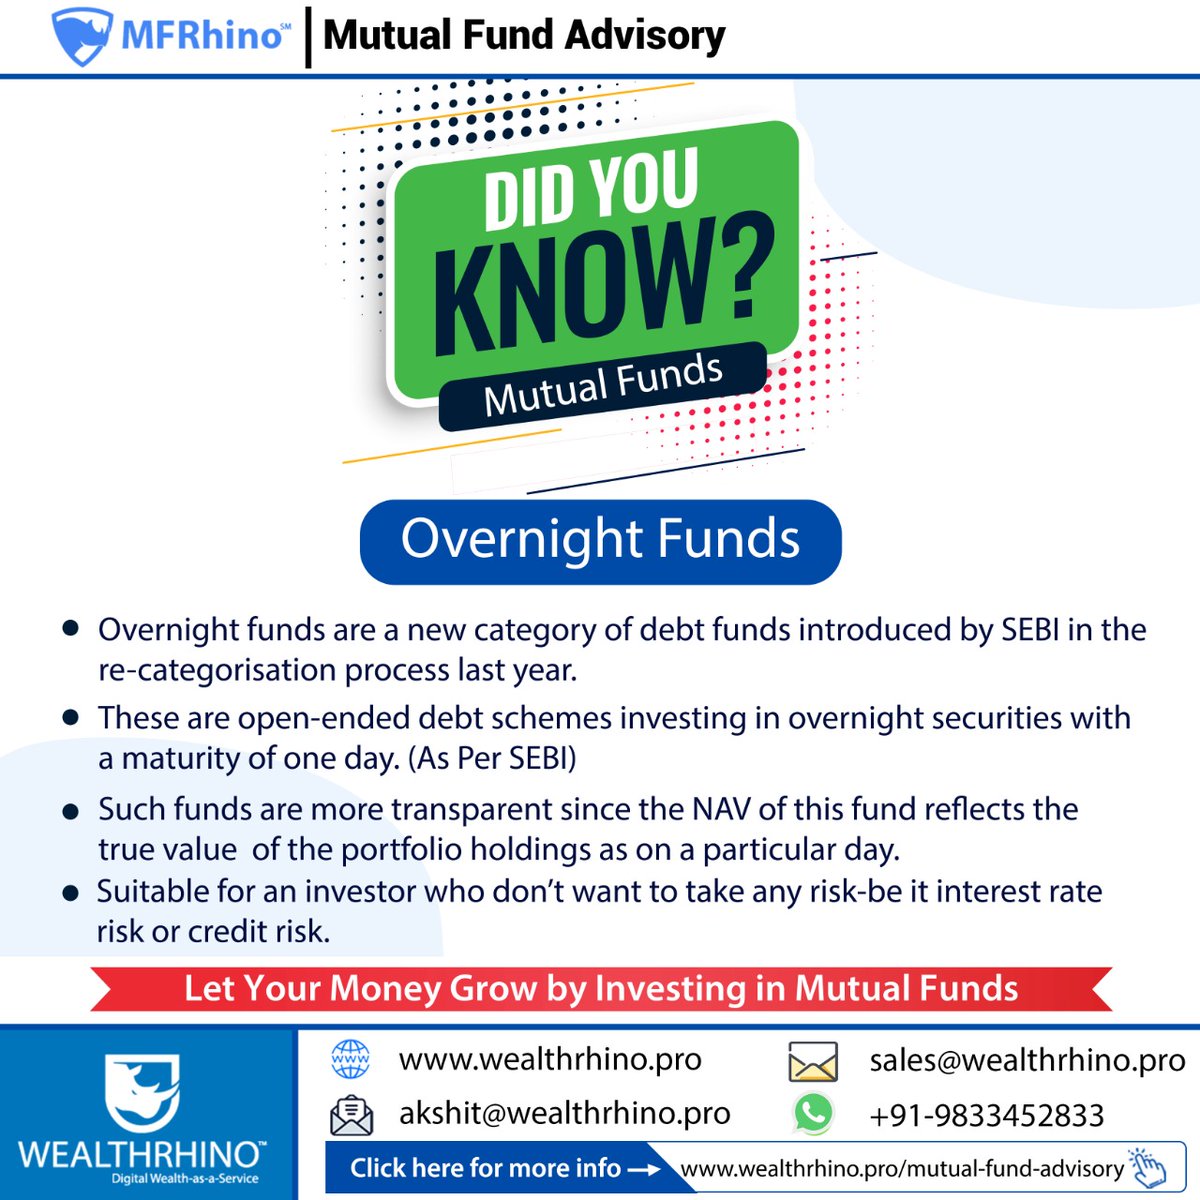 To Know More About Mutual Funds, Connect With Us Instantly!

#didyouknow #overnightfunds #mutualfunds #mutualfundadvisor #stockrhino #stockrhinoin